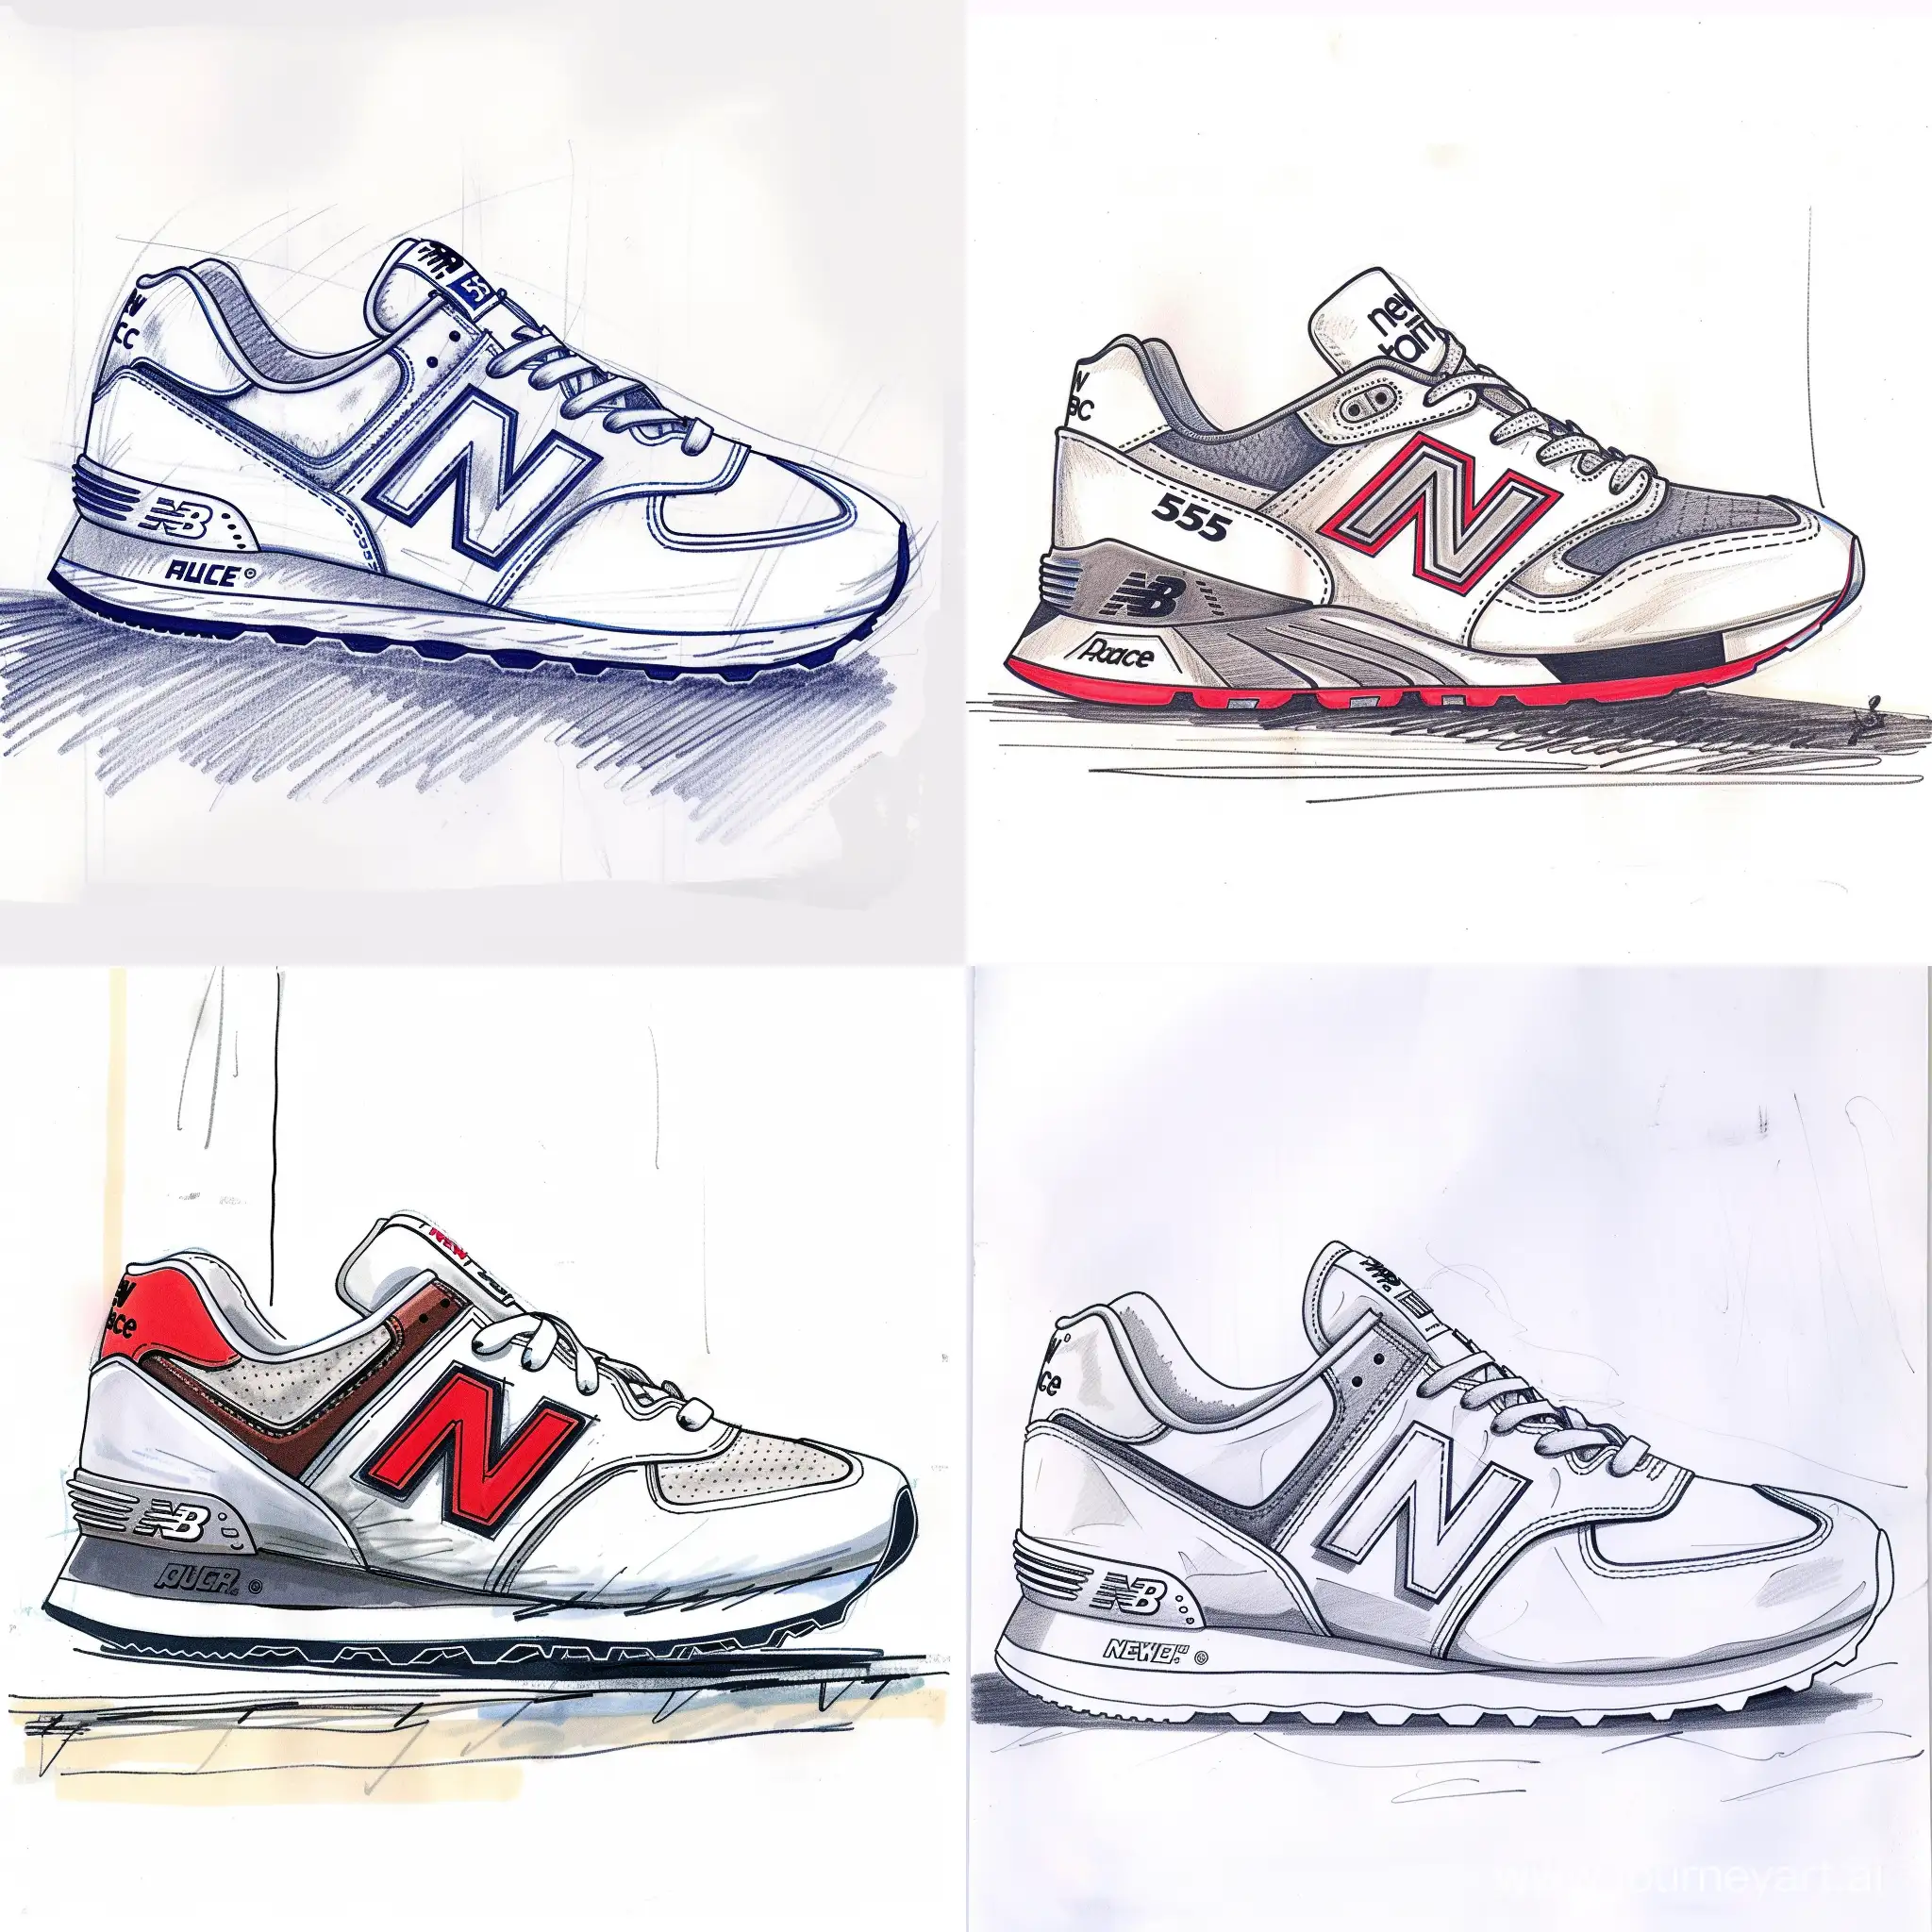 Sneaker-Design-Sketch-Inspired-by-New-Balance-550